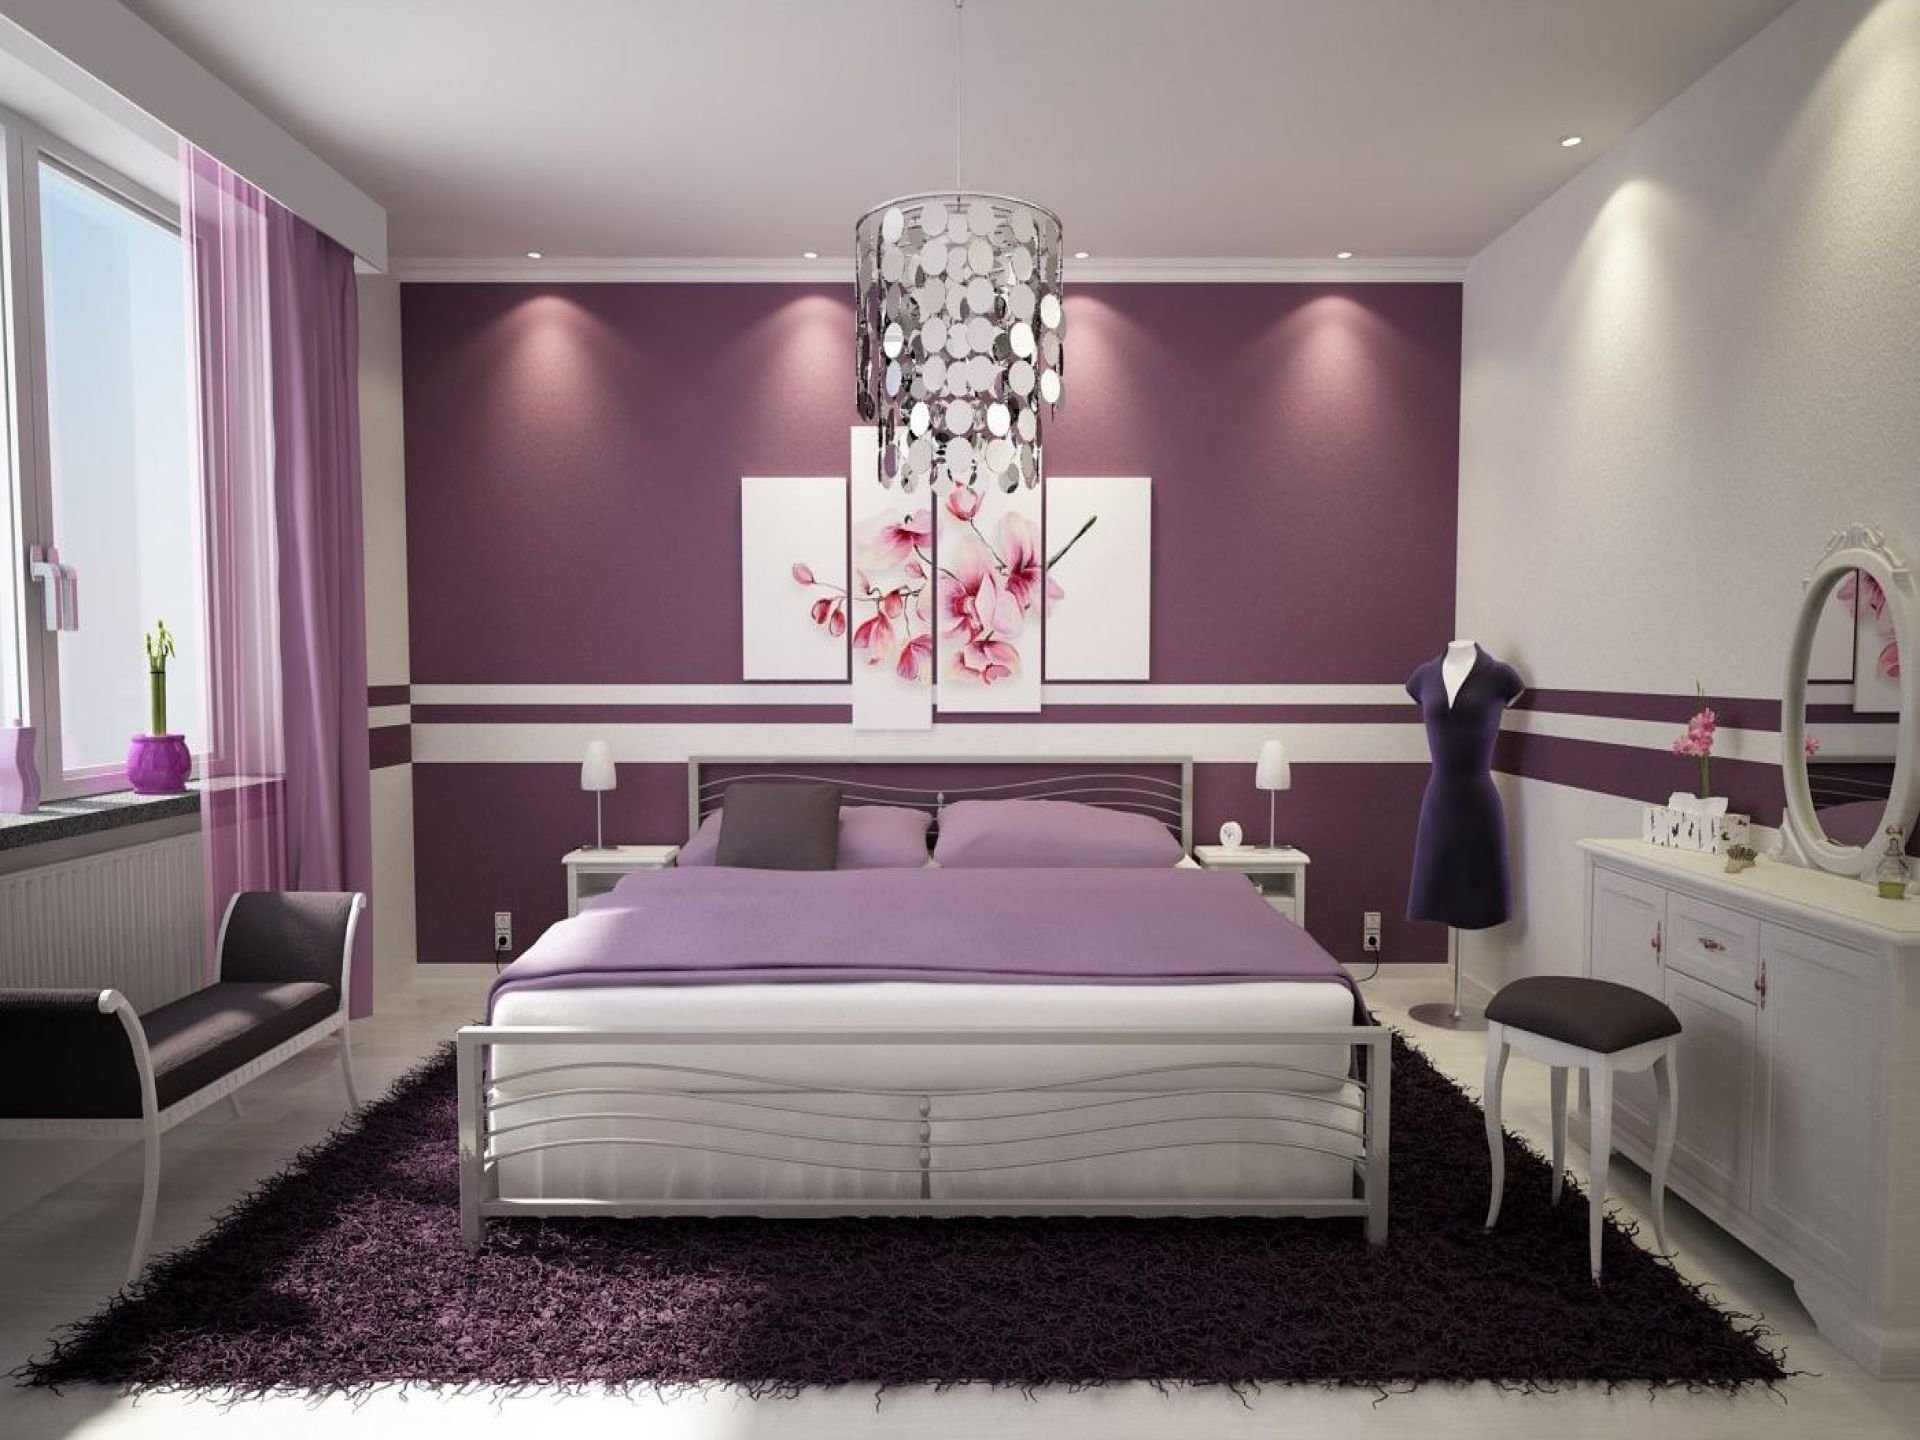 10 Fantastic Purple And Grey Bedroom Ideas 23 inspirational purple interior designs you must see 2023